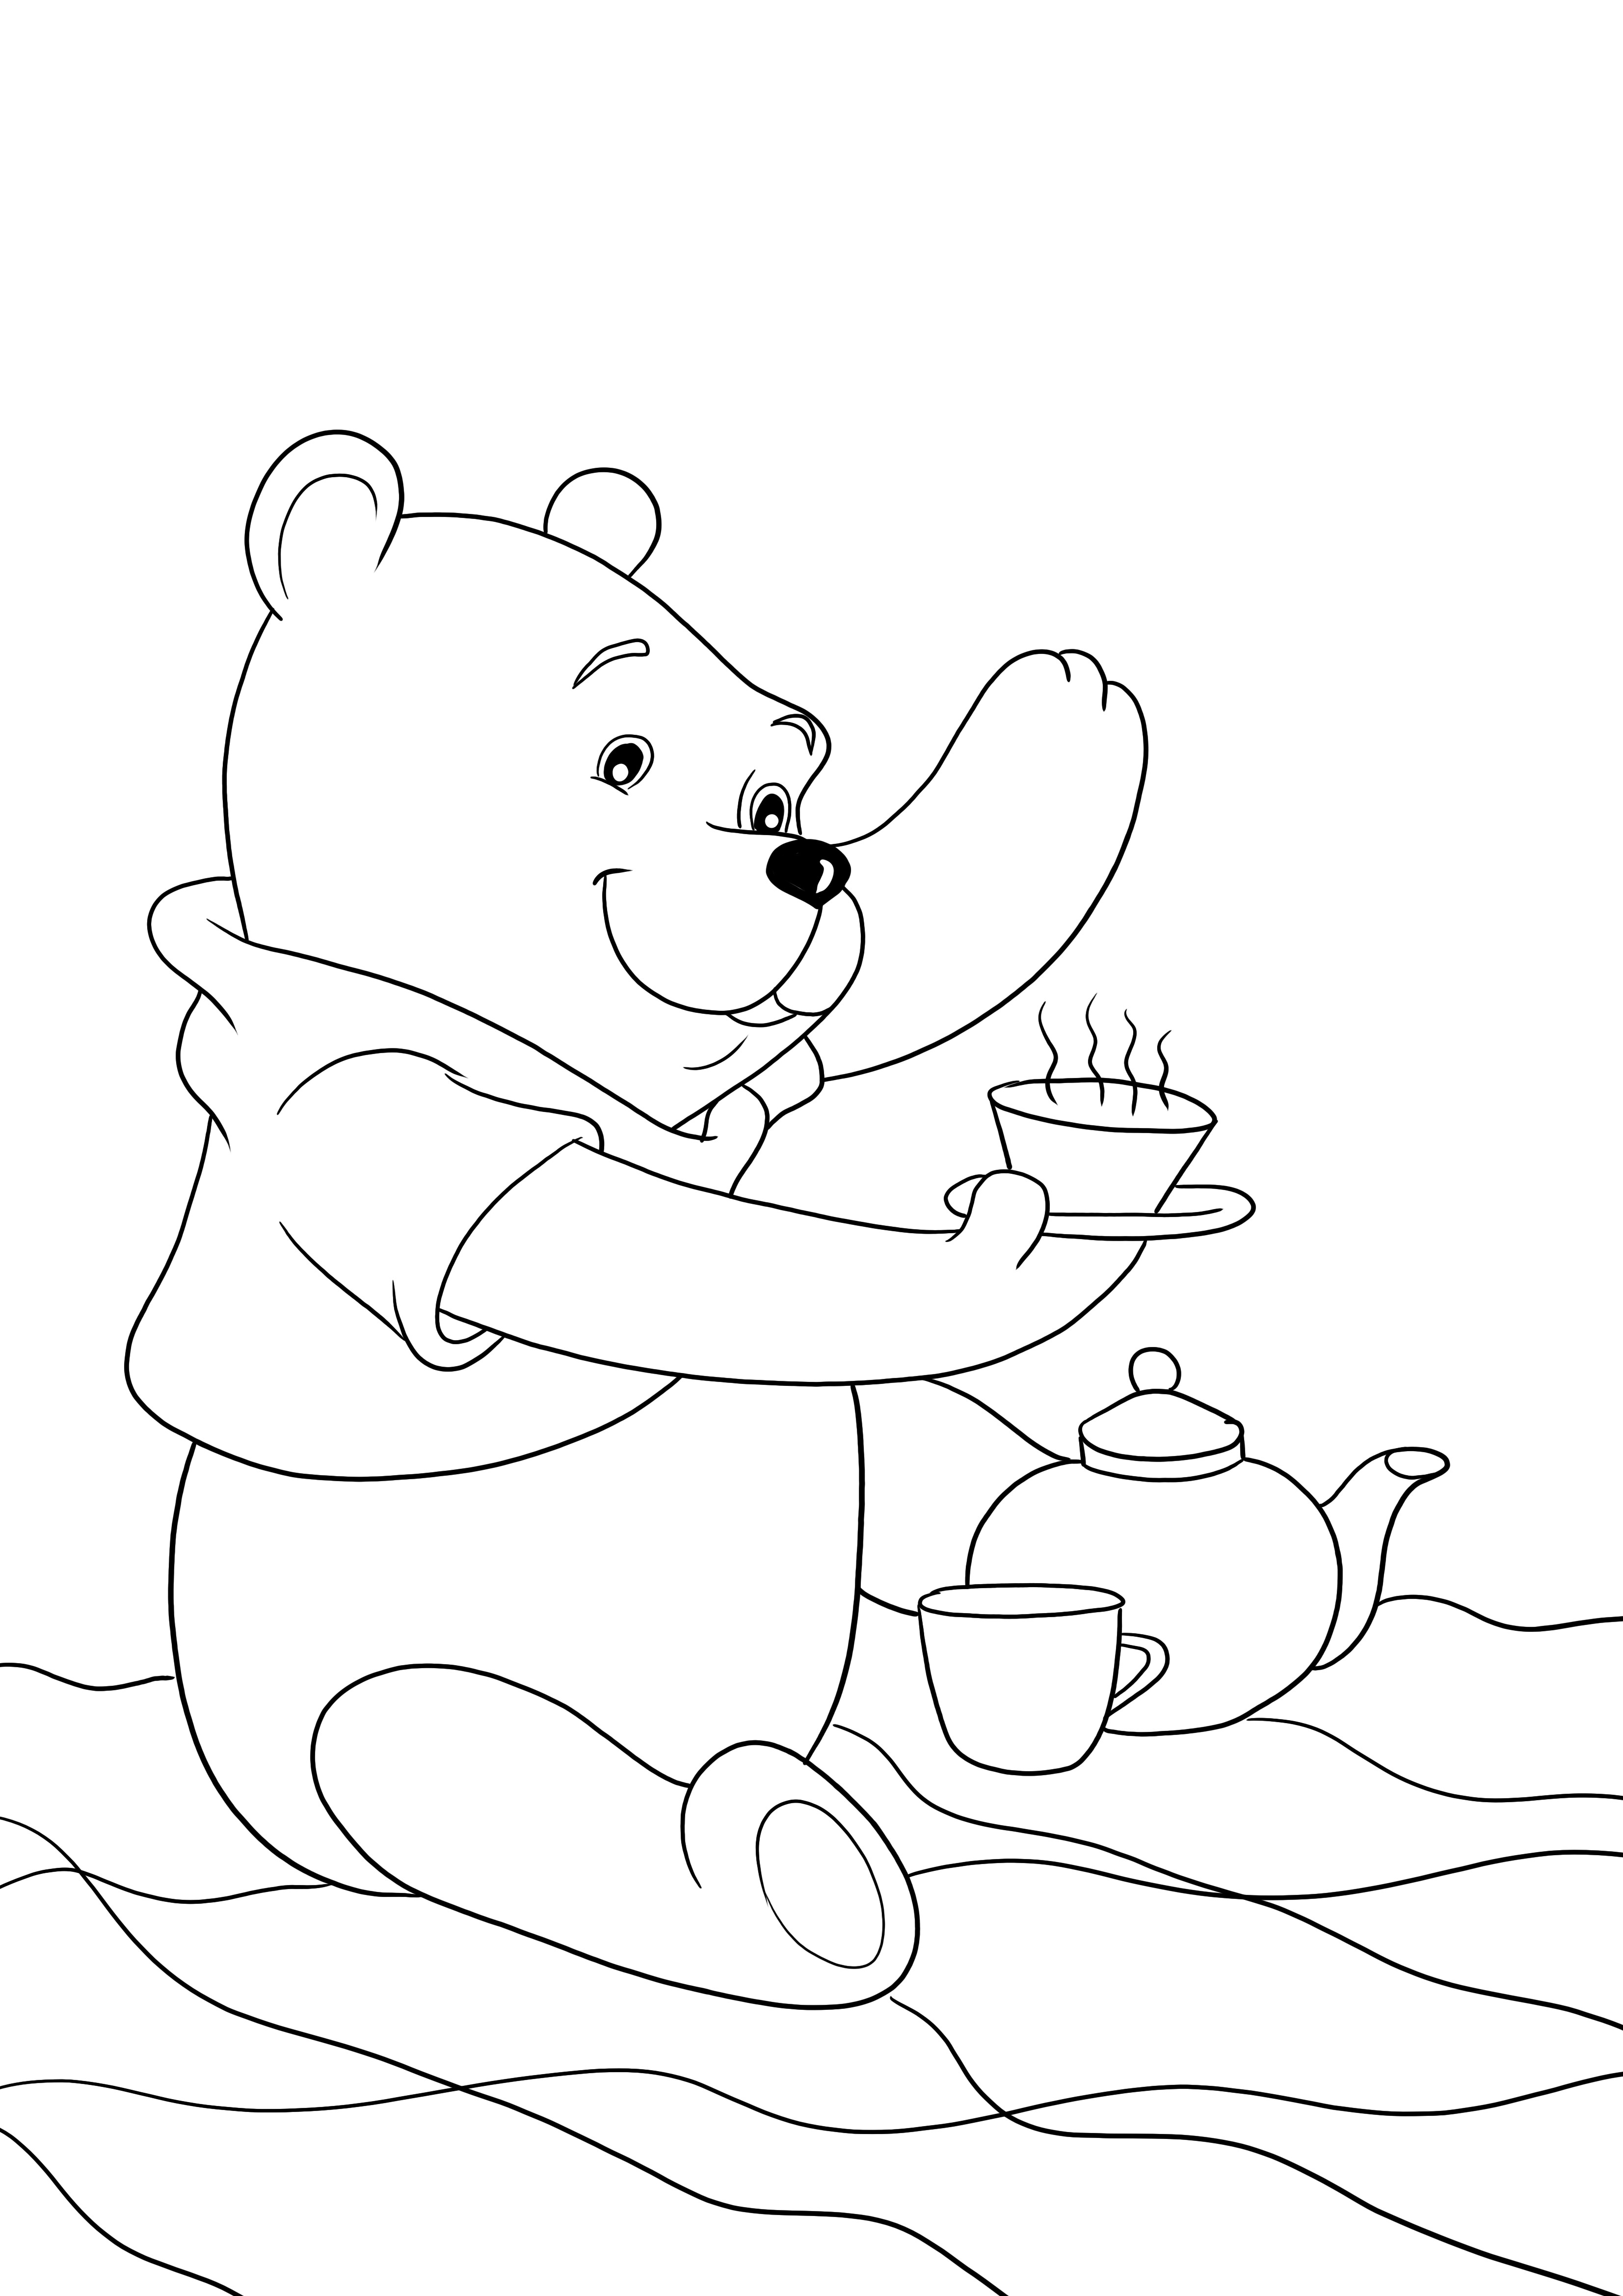 Winnie drinking tea downloading page free for coloring for kids